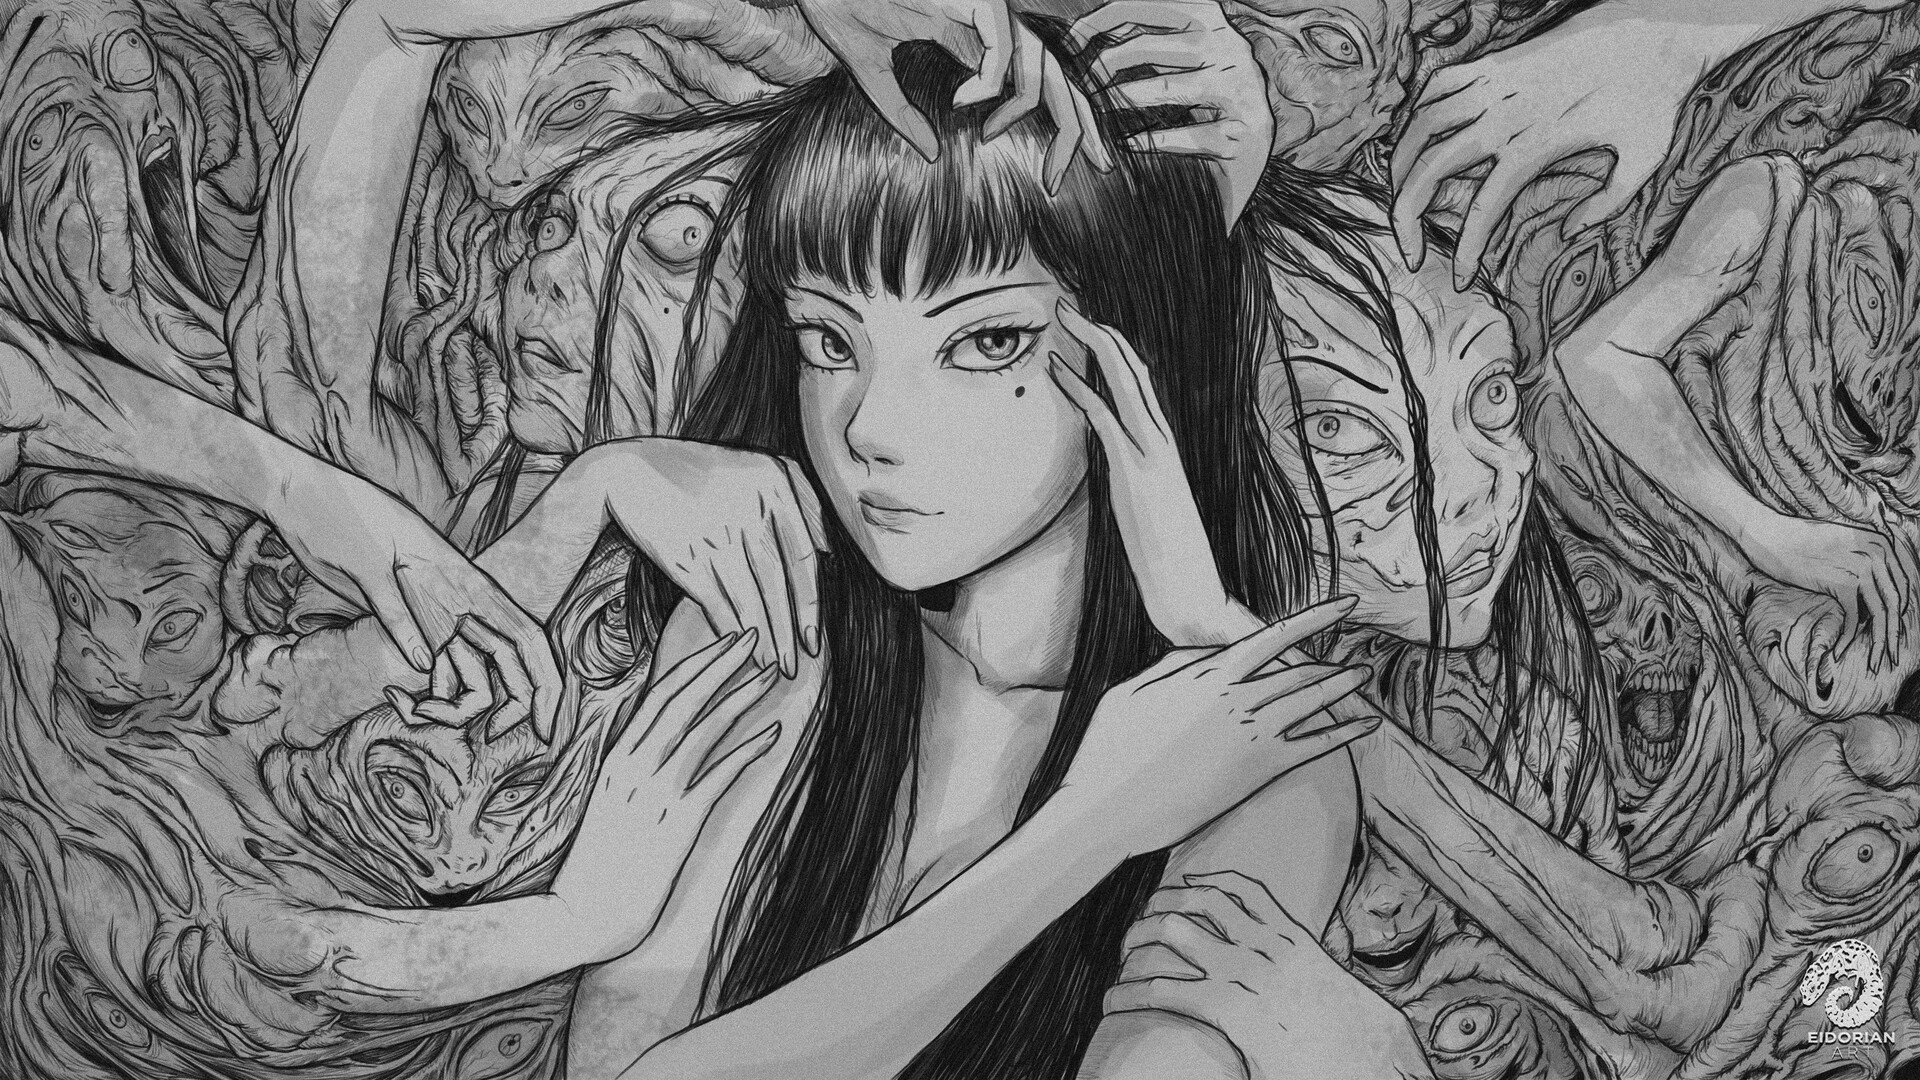 Junji Ito Tomie what makes her so scary